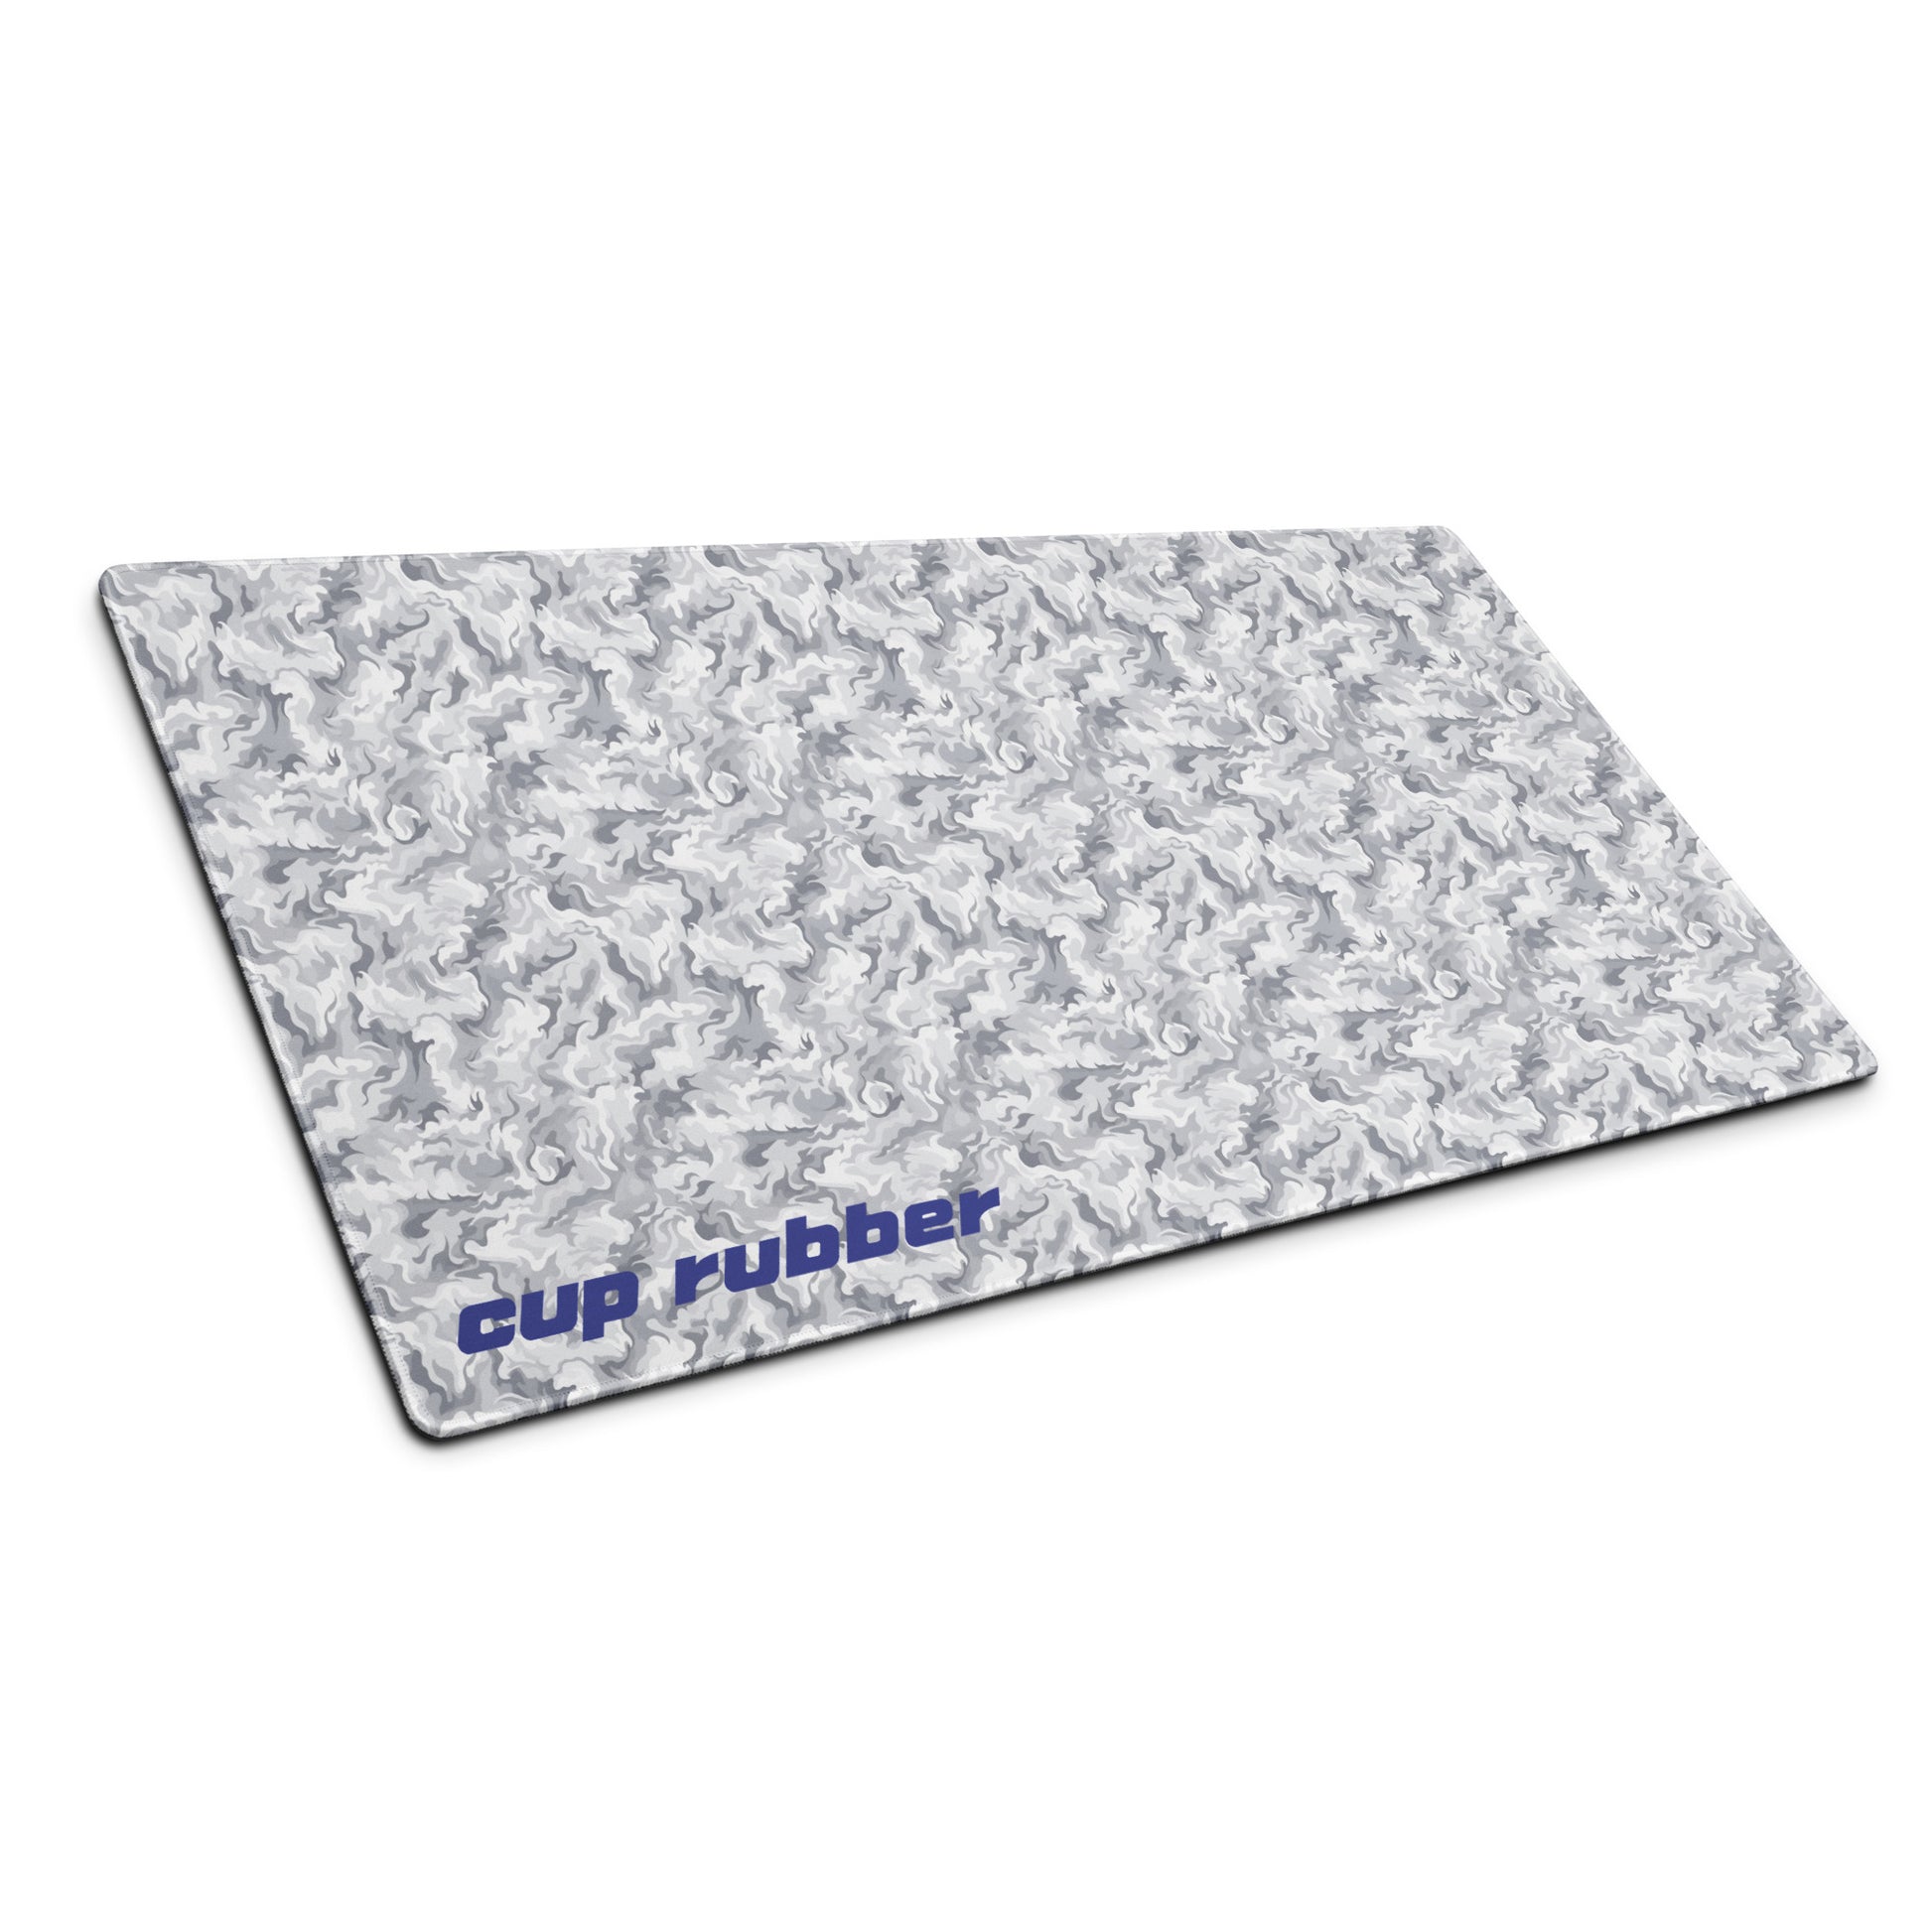 A 36" x 18" desk pad with a camo pattern and the word "Cup Rubber" on it in the bottom left corner shown at an angle. Beige and White in color.